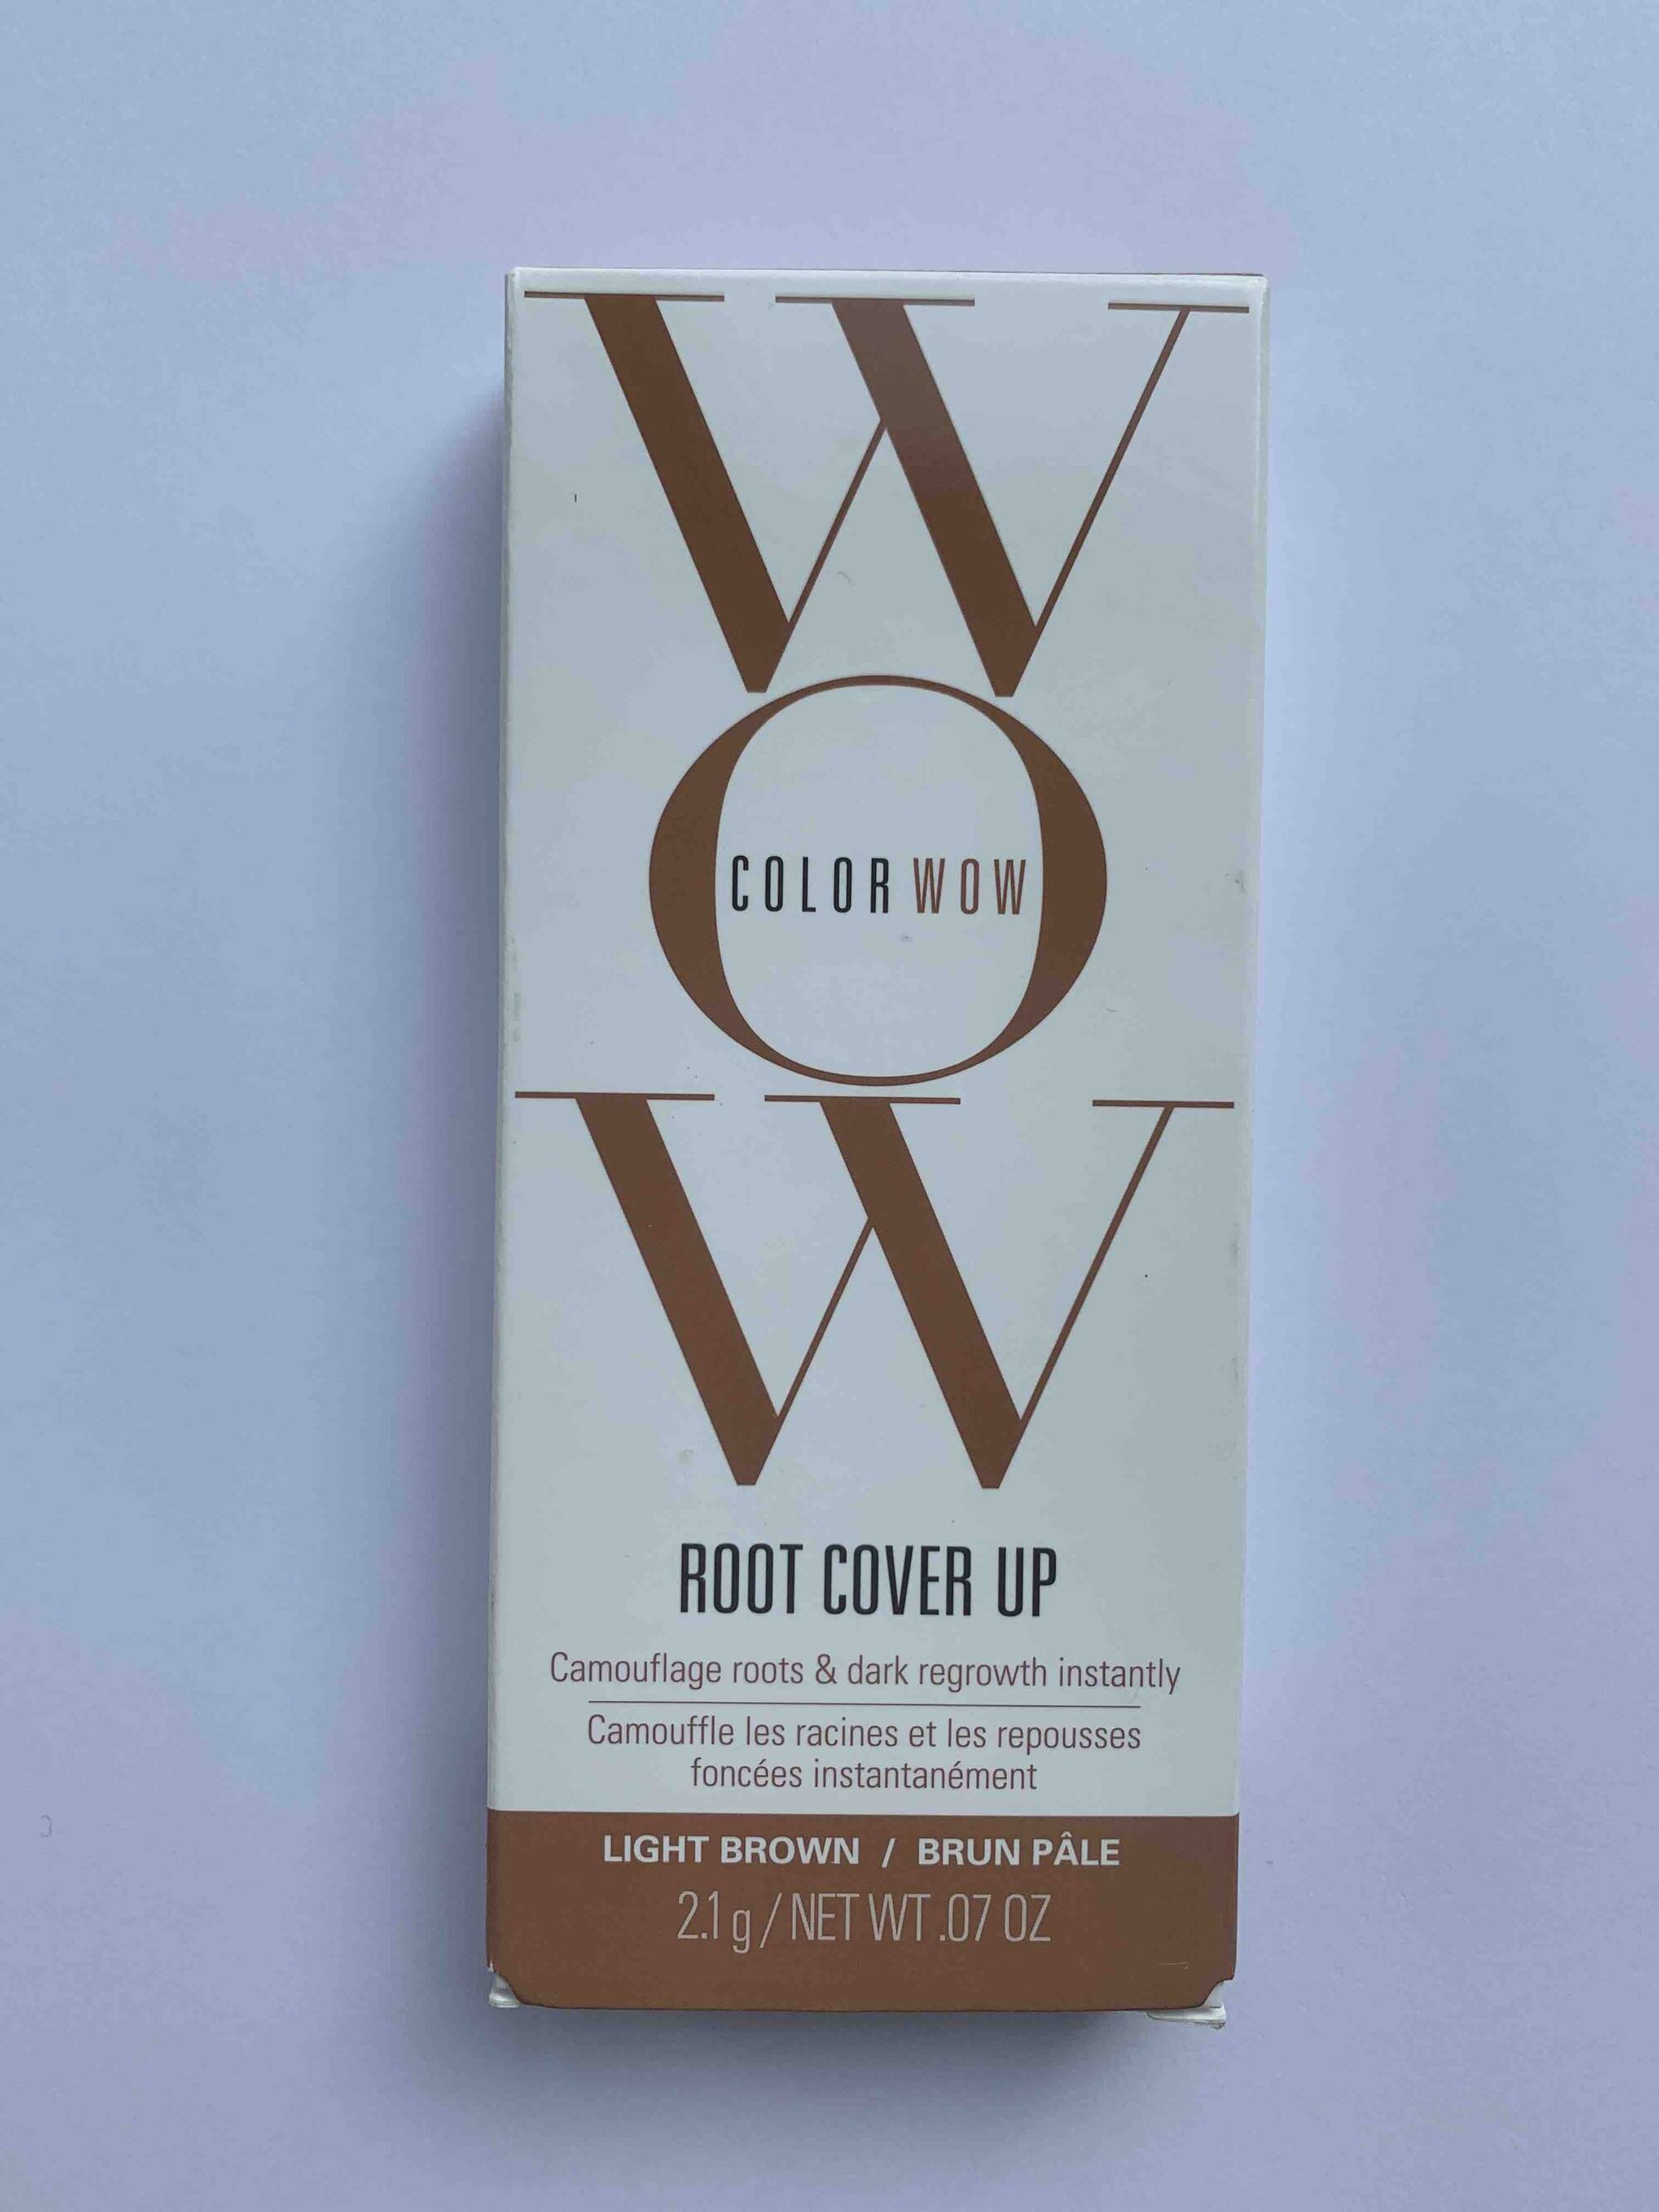 WOW - Color wow - Root cover up light brown